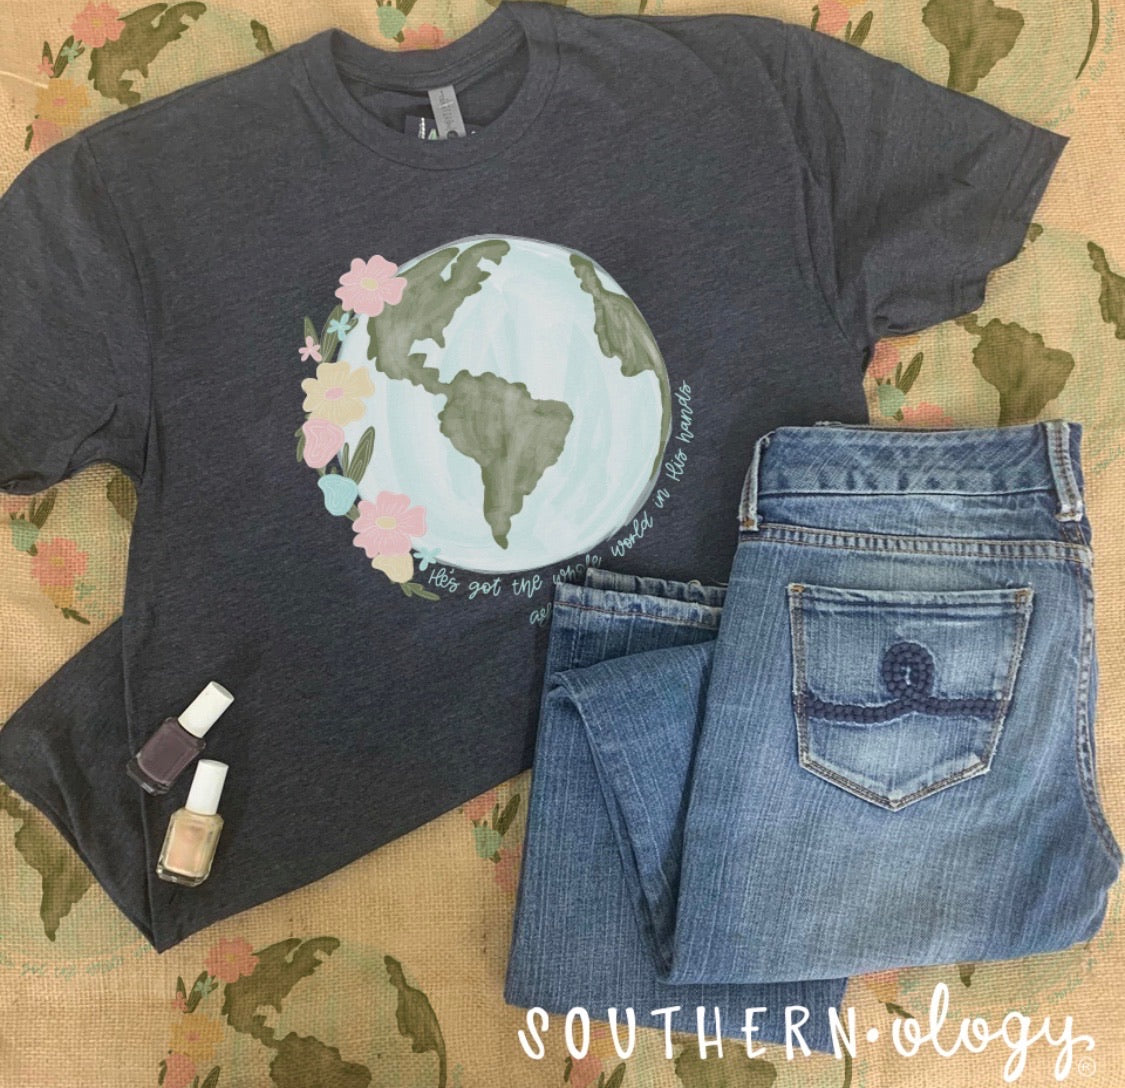 He’s Got The Whole World in His Hands T-shirt